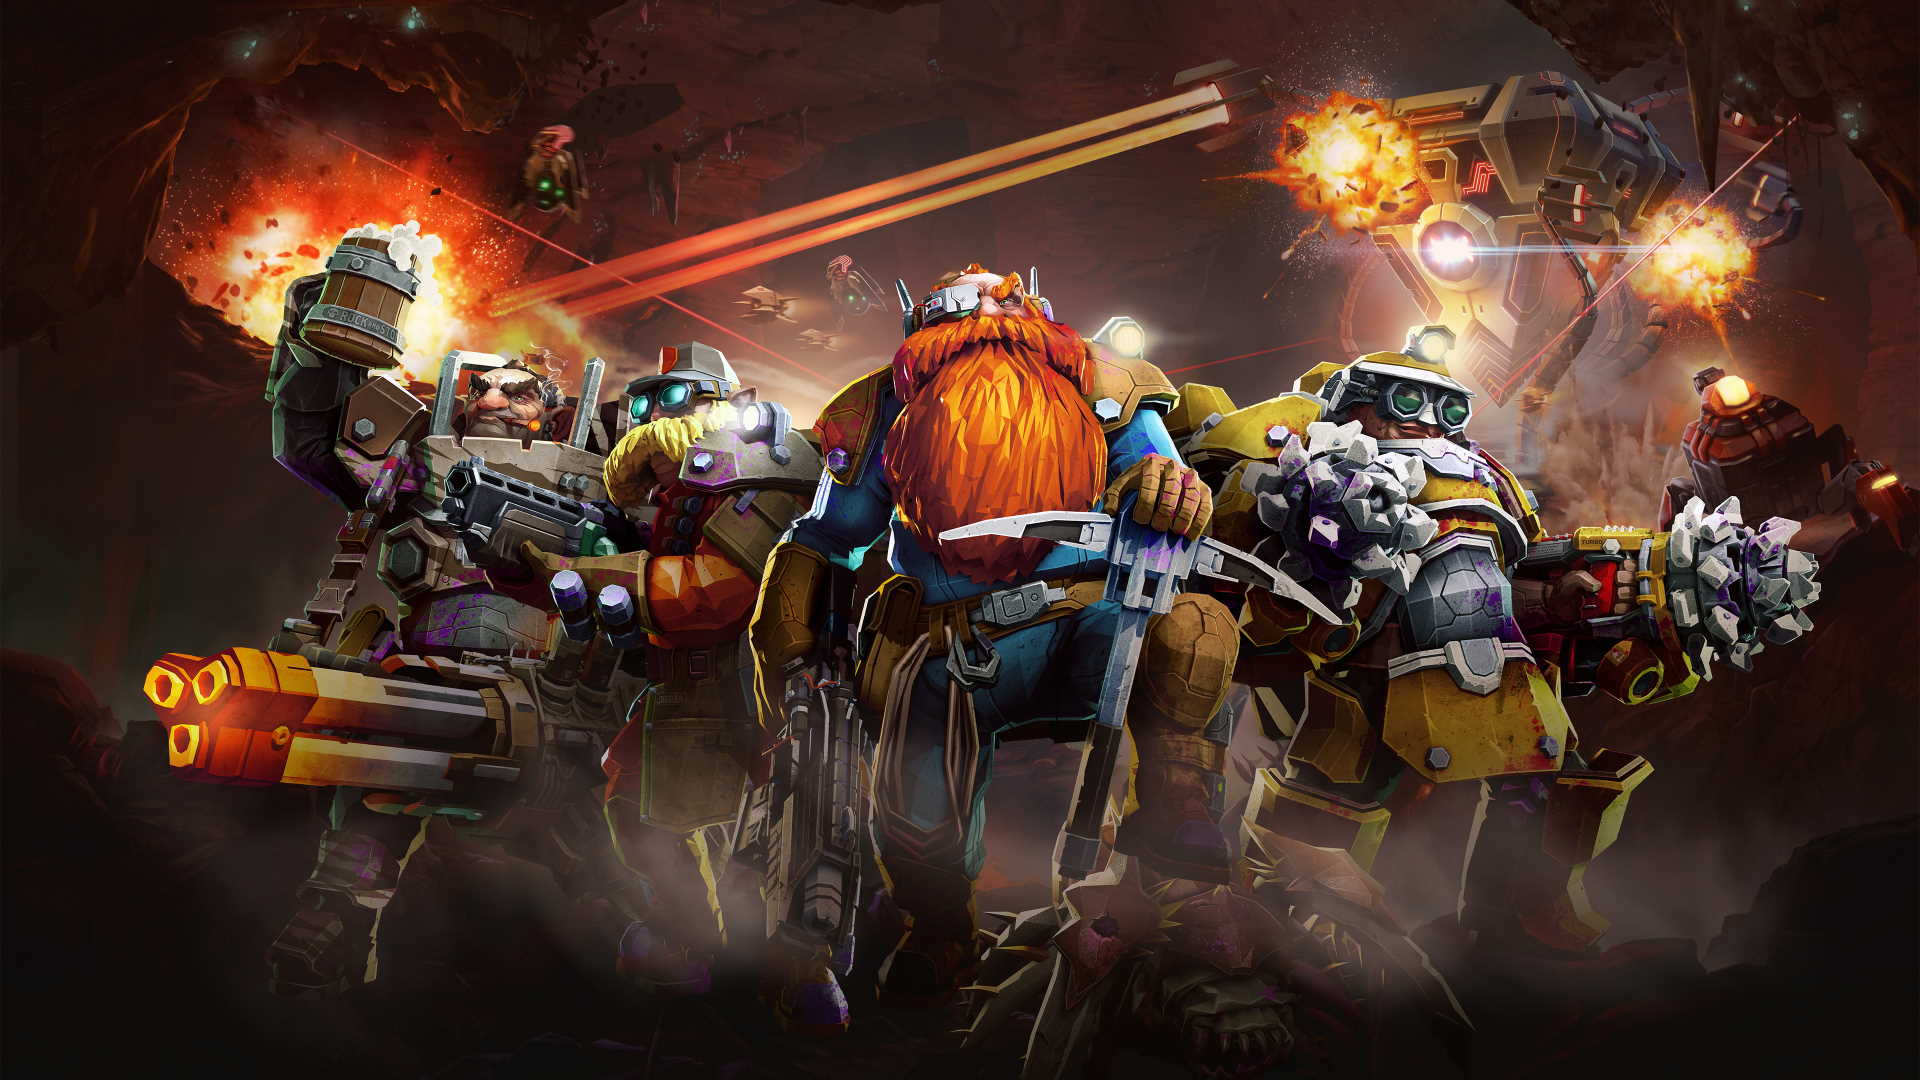 Deep Rock Galactic "Seasons" are here with a massive update Handson